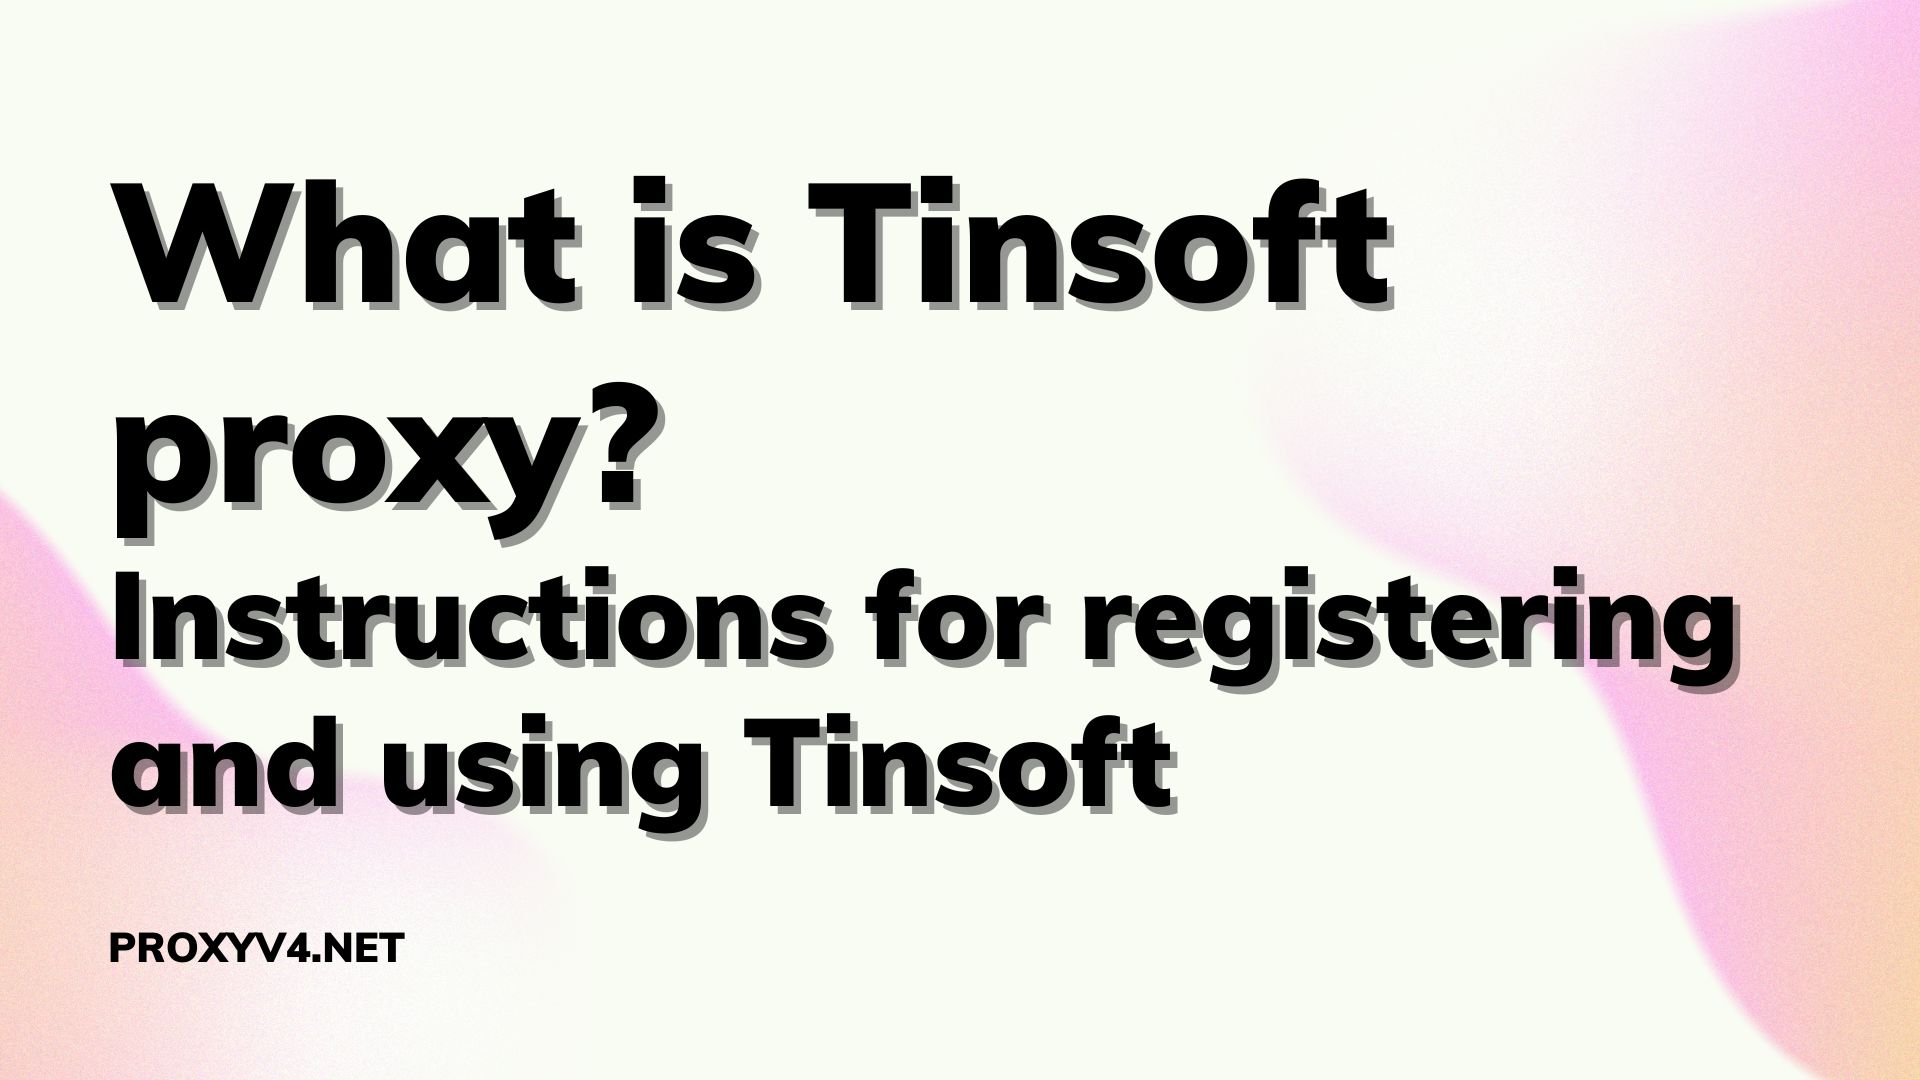 What is Tinsoft proxy? Instructions for registering and using Tinsoft